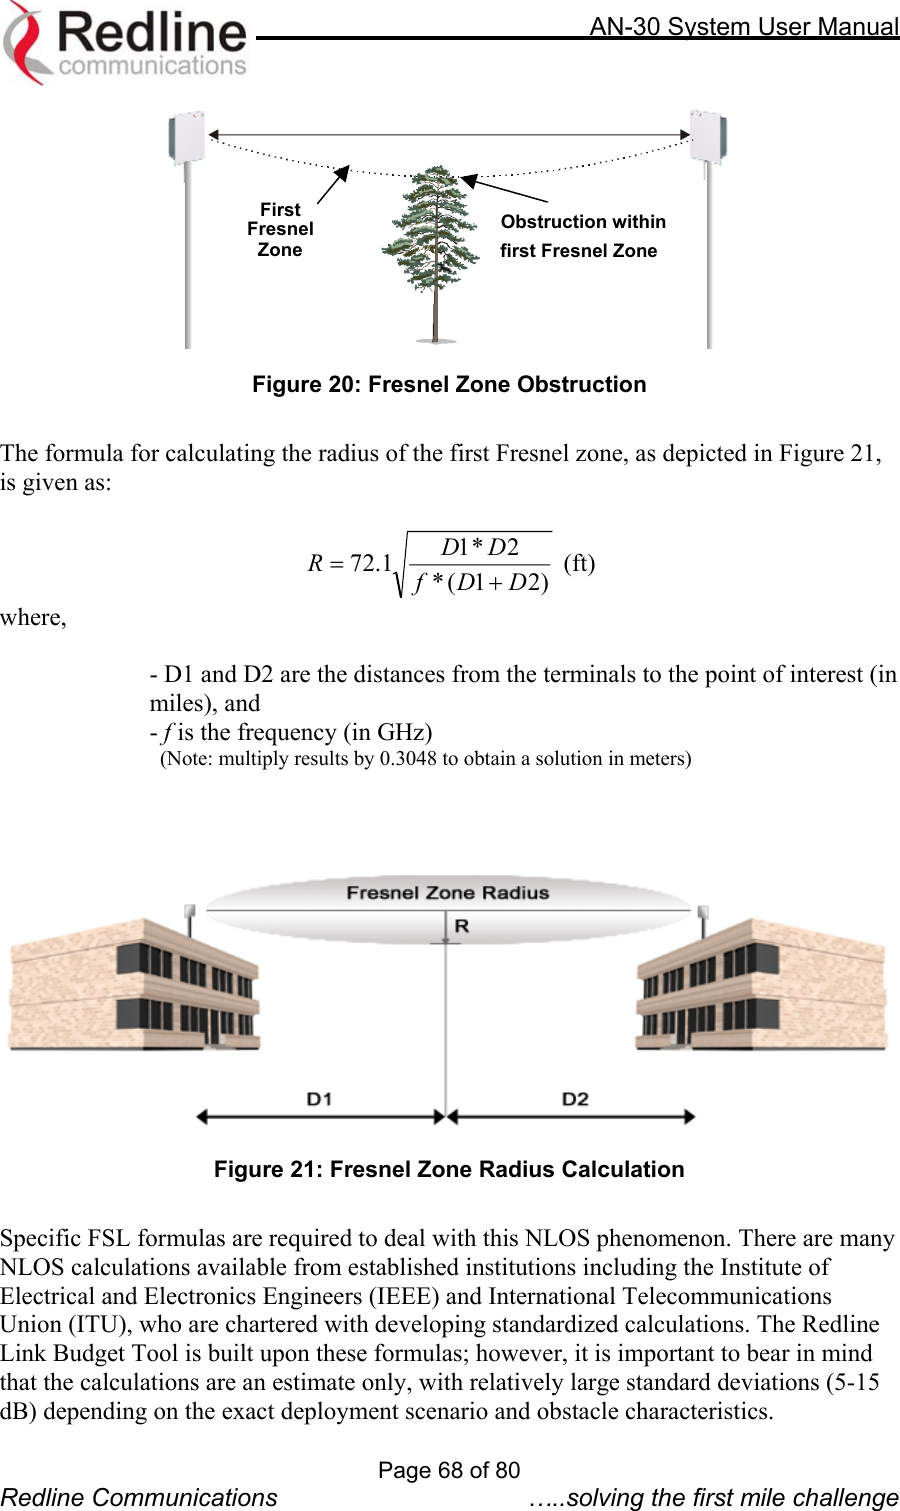     AN-30 System User Manual   First Fresnel Zone Obstruction withinfirst Fresnel Zone Figure 20: Fresnel Zone Obstruction  The formula for calculating the radius of the first Fresnel zone, as depicted in Figure 21, is given as:  )21(*2*11.72 DDfDDR+= (ft) where,  - D1 and D2 are the distances from the terminals to the point of interest (in miles), and  - f is the frequency (in GHz)   (Note: multiply results by 0.3048 to obtain a solution in meters)     Figure 21: Fresnel Zone Radius Calculation  Specific FSL formulas are required to deal with this NLOS phenomenon. There are many NLOS calculations available from established institutions including the Institute of Electrical and Electronics Engineers (IEEE) and International Telecommunications Union (ITU), who are chartered with developing standardized calculations. The Redline Link Budget Tool is built upon these formulas; however, it is important to bear in mind that the calculations are an estimate only, with relatively large standard deviations (5-15 dB) depending on the exact deployment scenario and obstacle characteristics.   Page 68 of 80 Redline Communications  …..solving the first mile challenge 